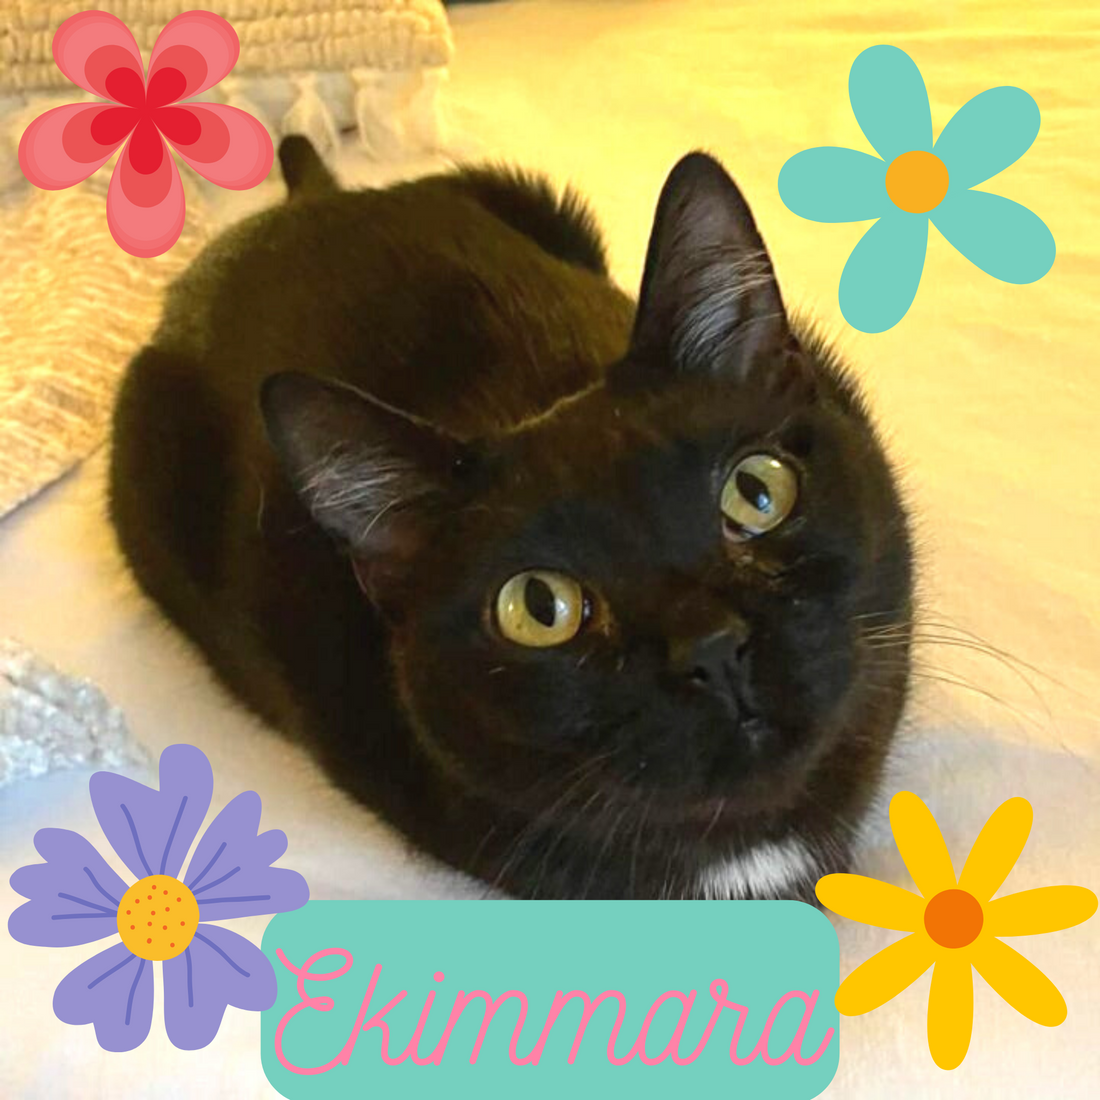 Ekimmara - Entangled Cat Cafe Rescue Cat of the Month (March)